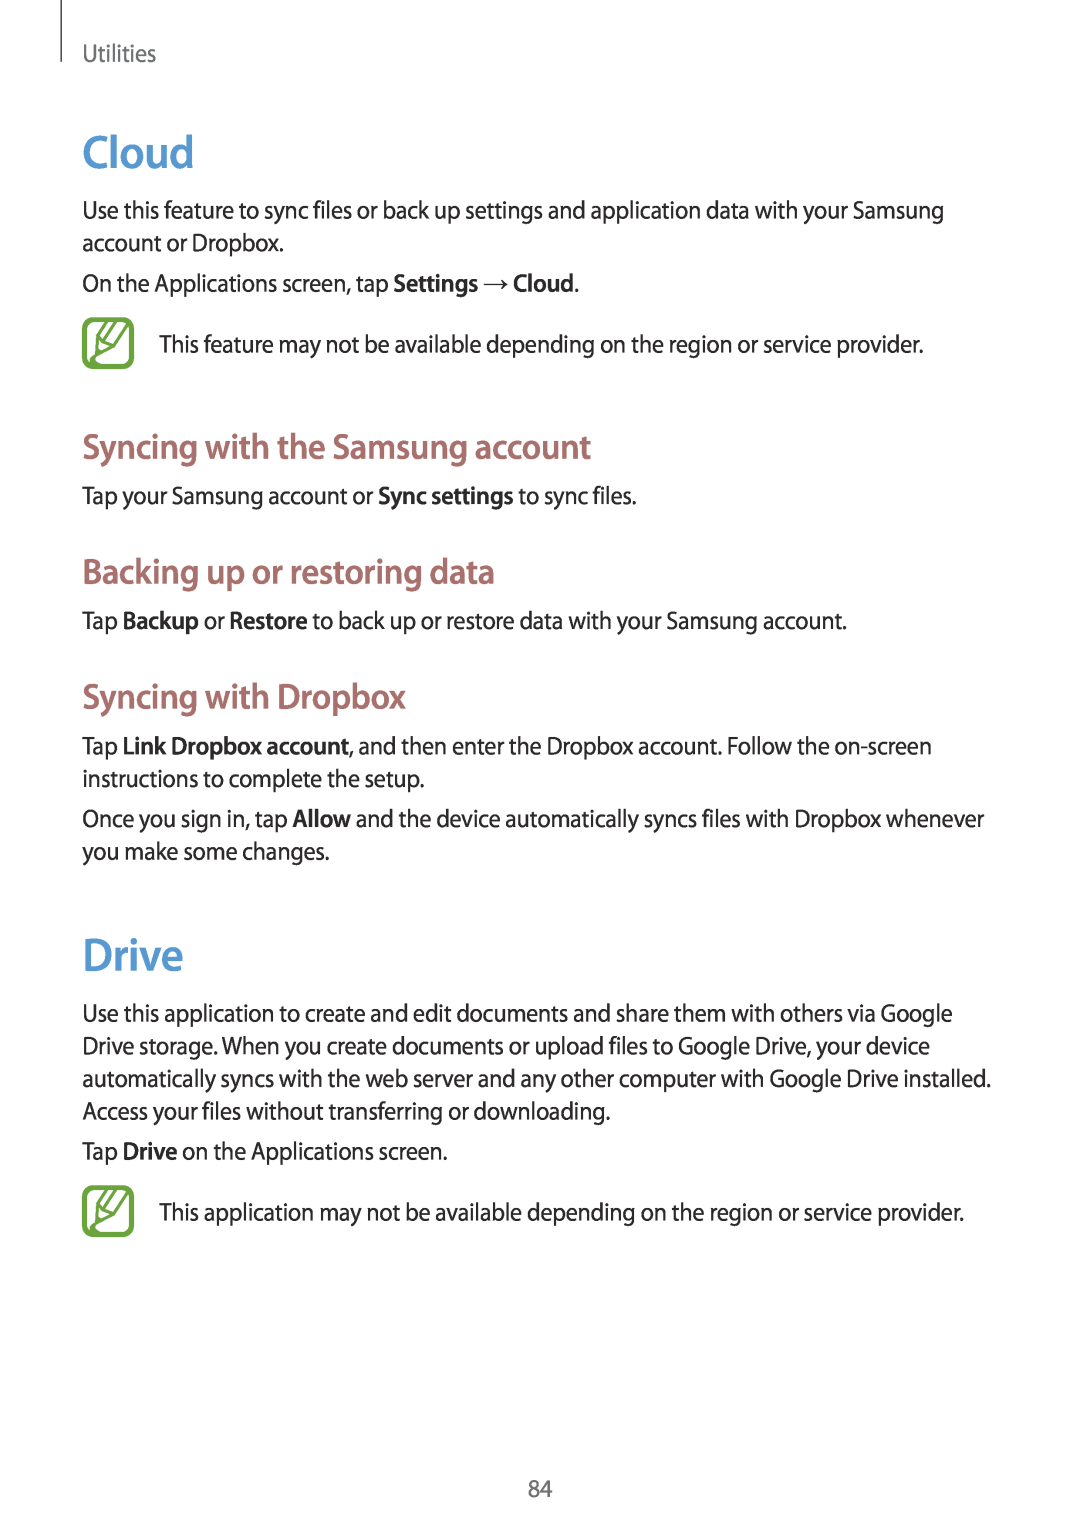 Samsung GT-I9195ZWIXEF Cloud, Drive, Syncing with the Samsung account, Backing up or restoring data, Syncing with Dropbox 